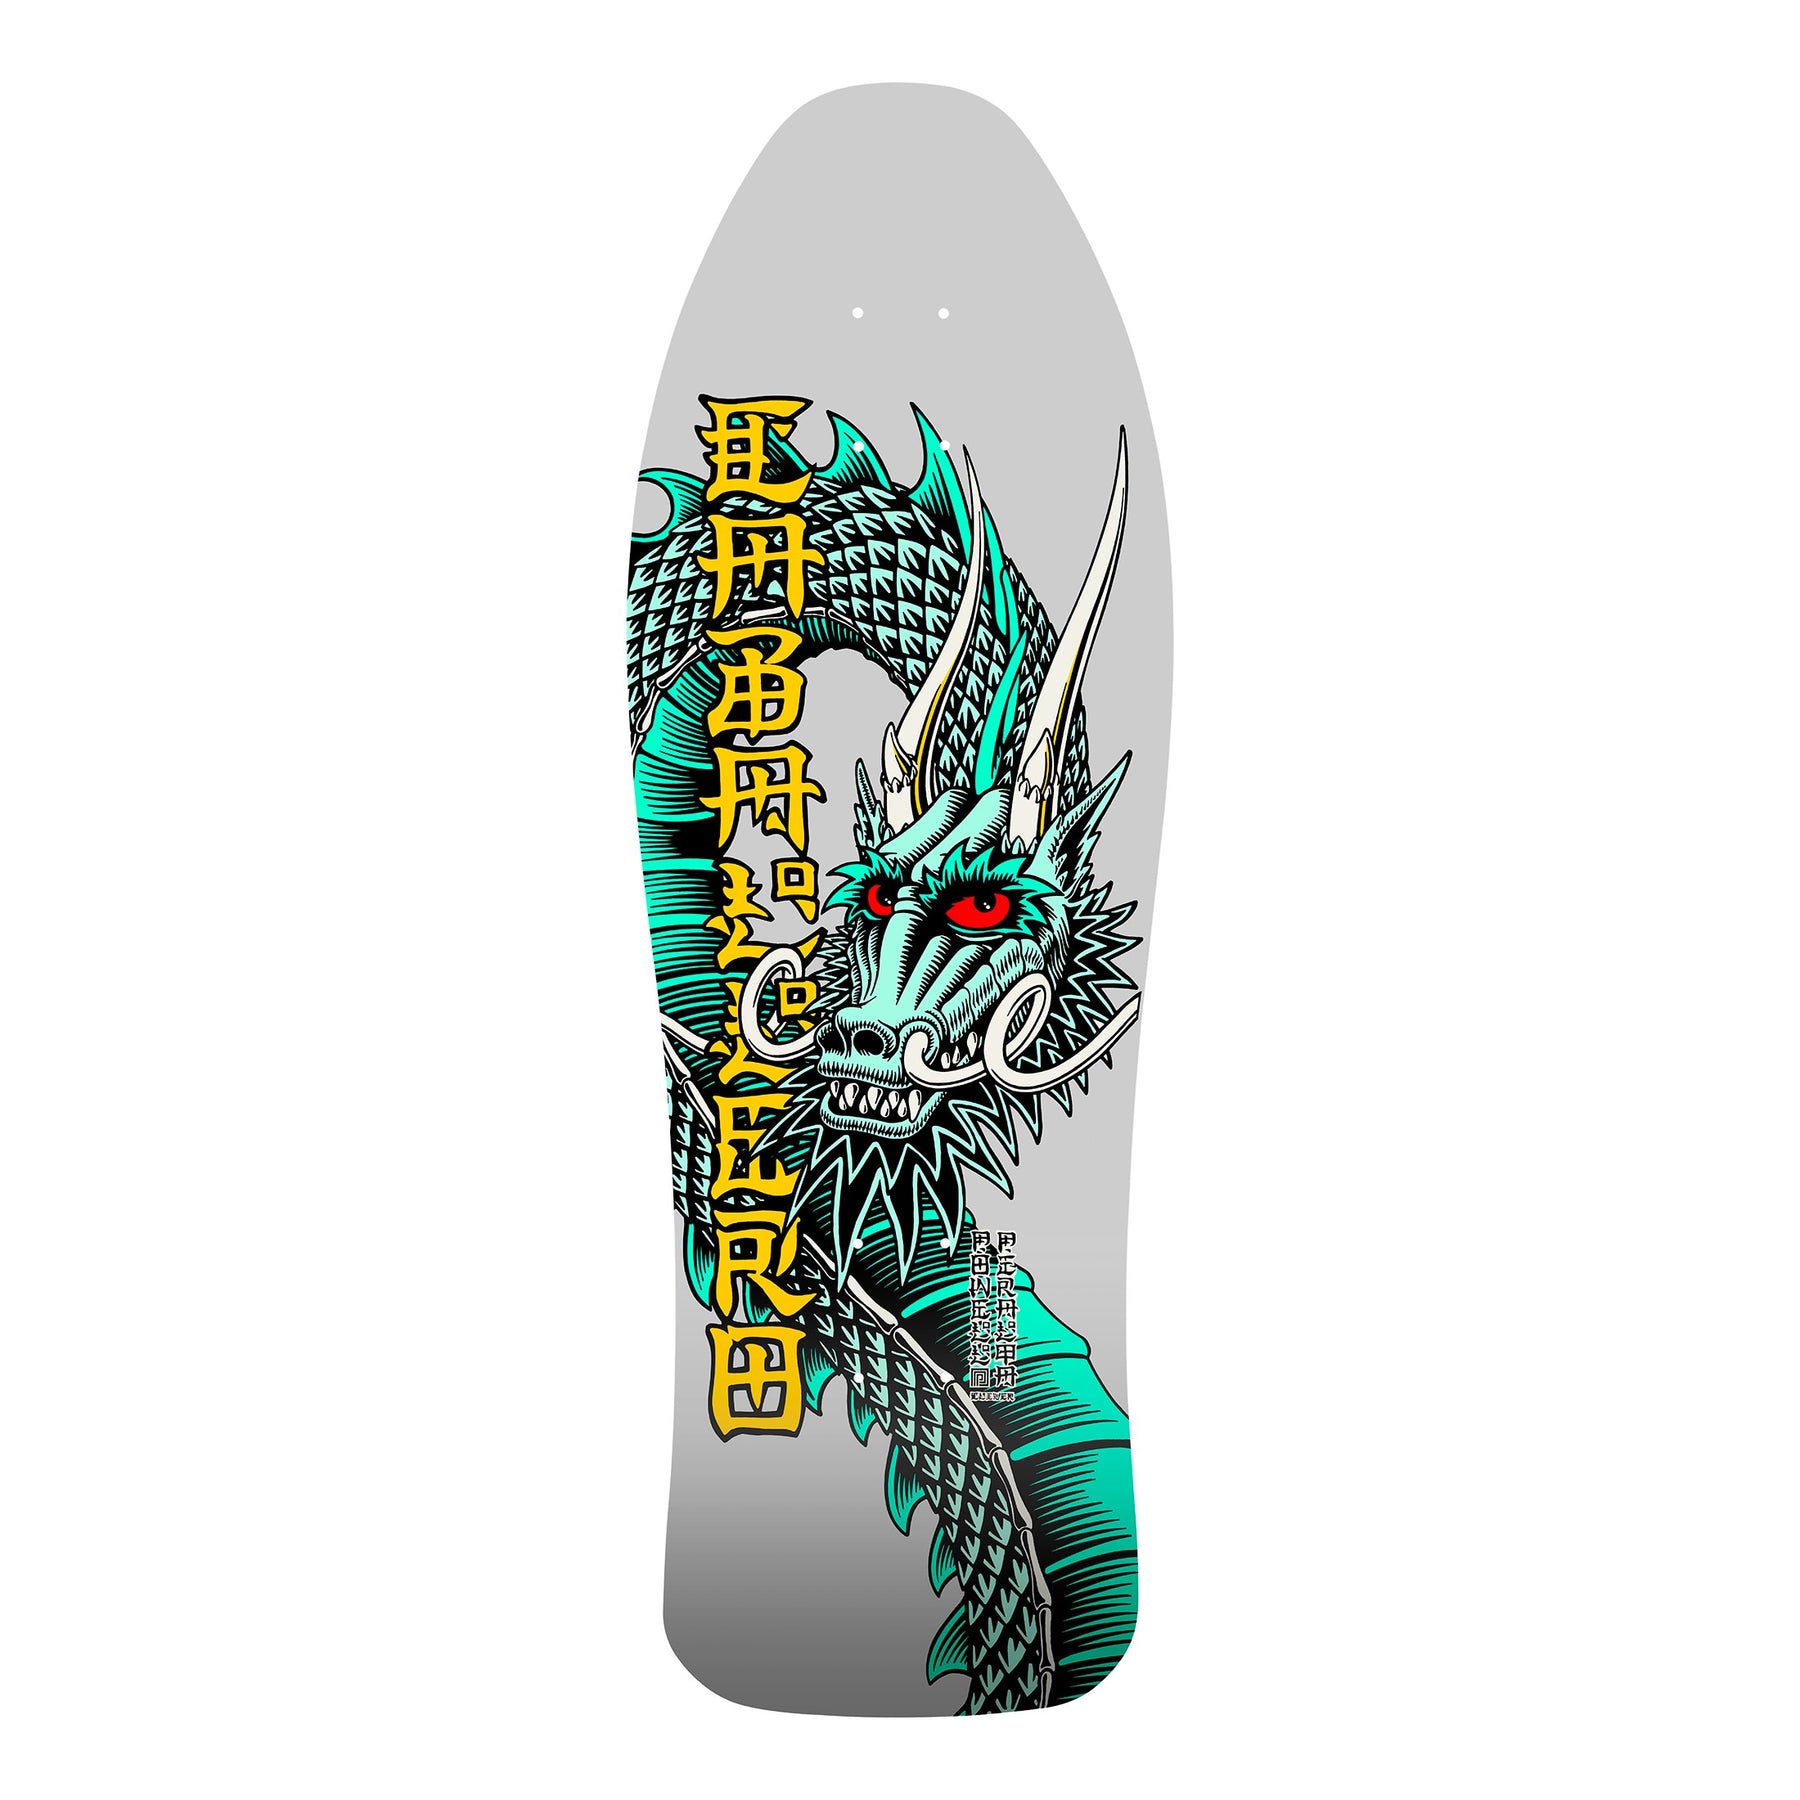 Powell-Peralta Re-Issue Limited Edition Collector Skateboard Decks, Series 12, Steve Caballero